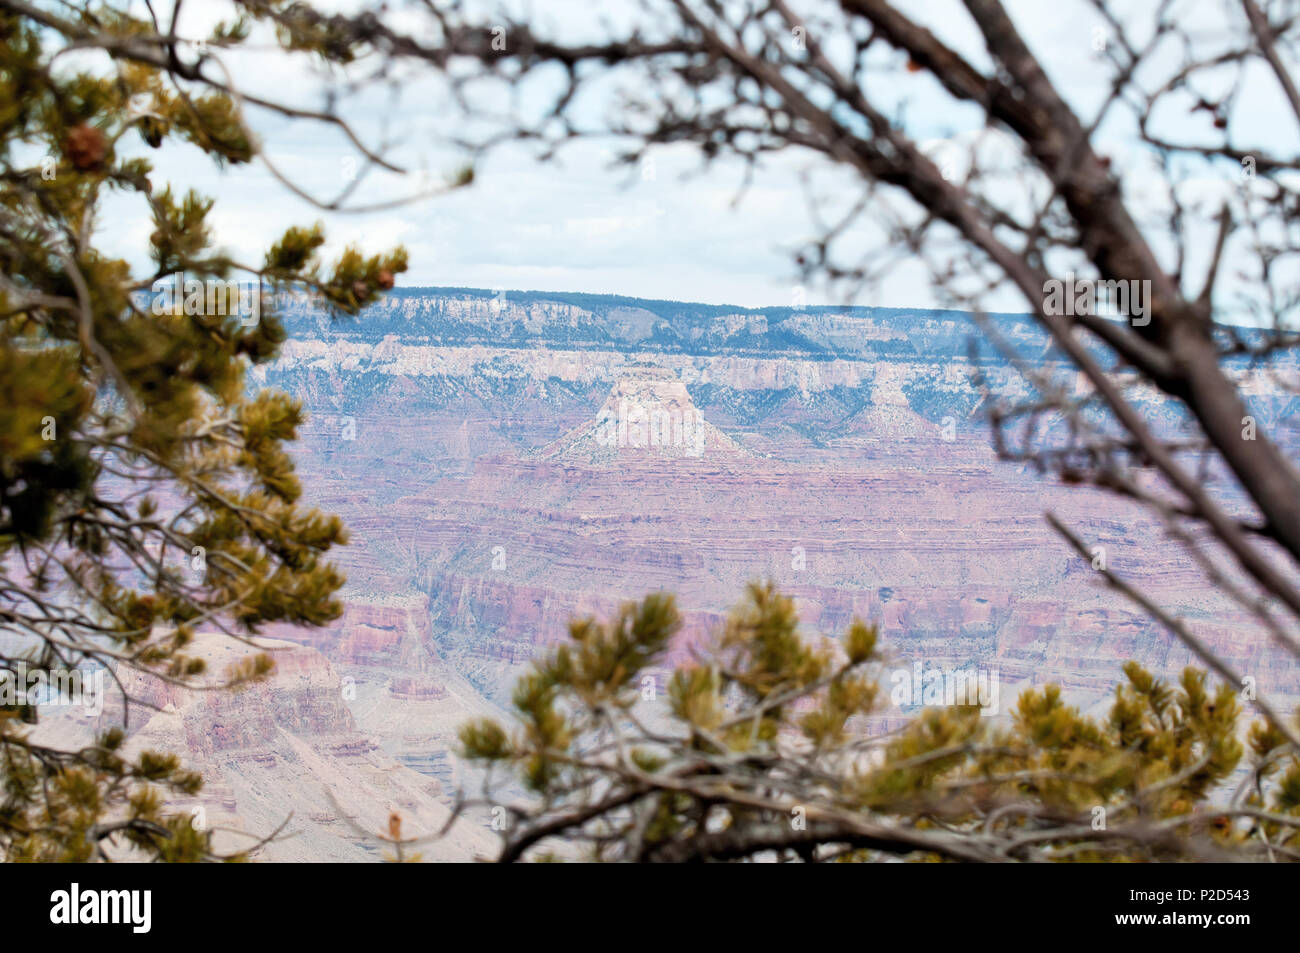 Looking at the grand canyon through trees and shrubbery. Stock Photo